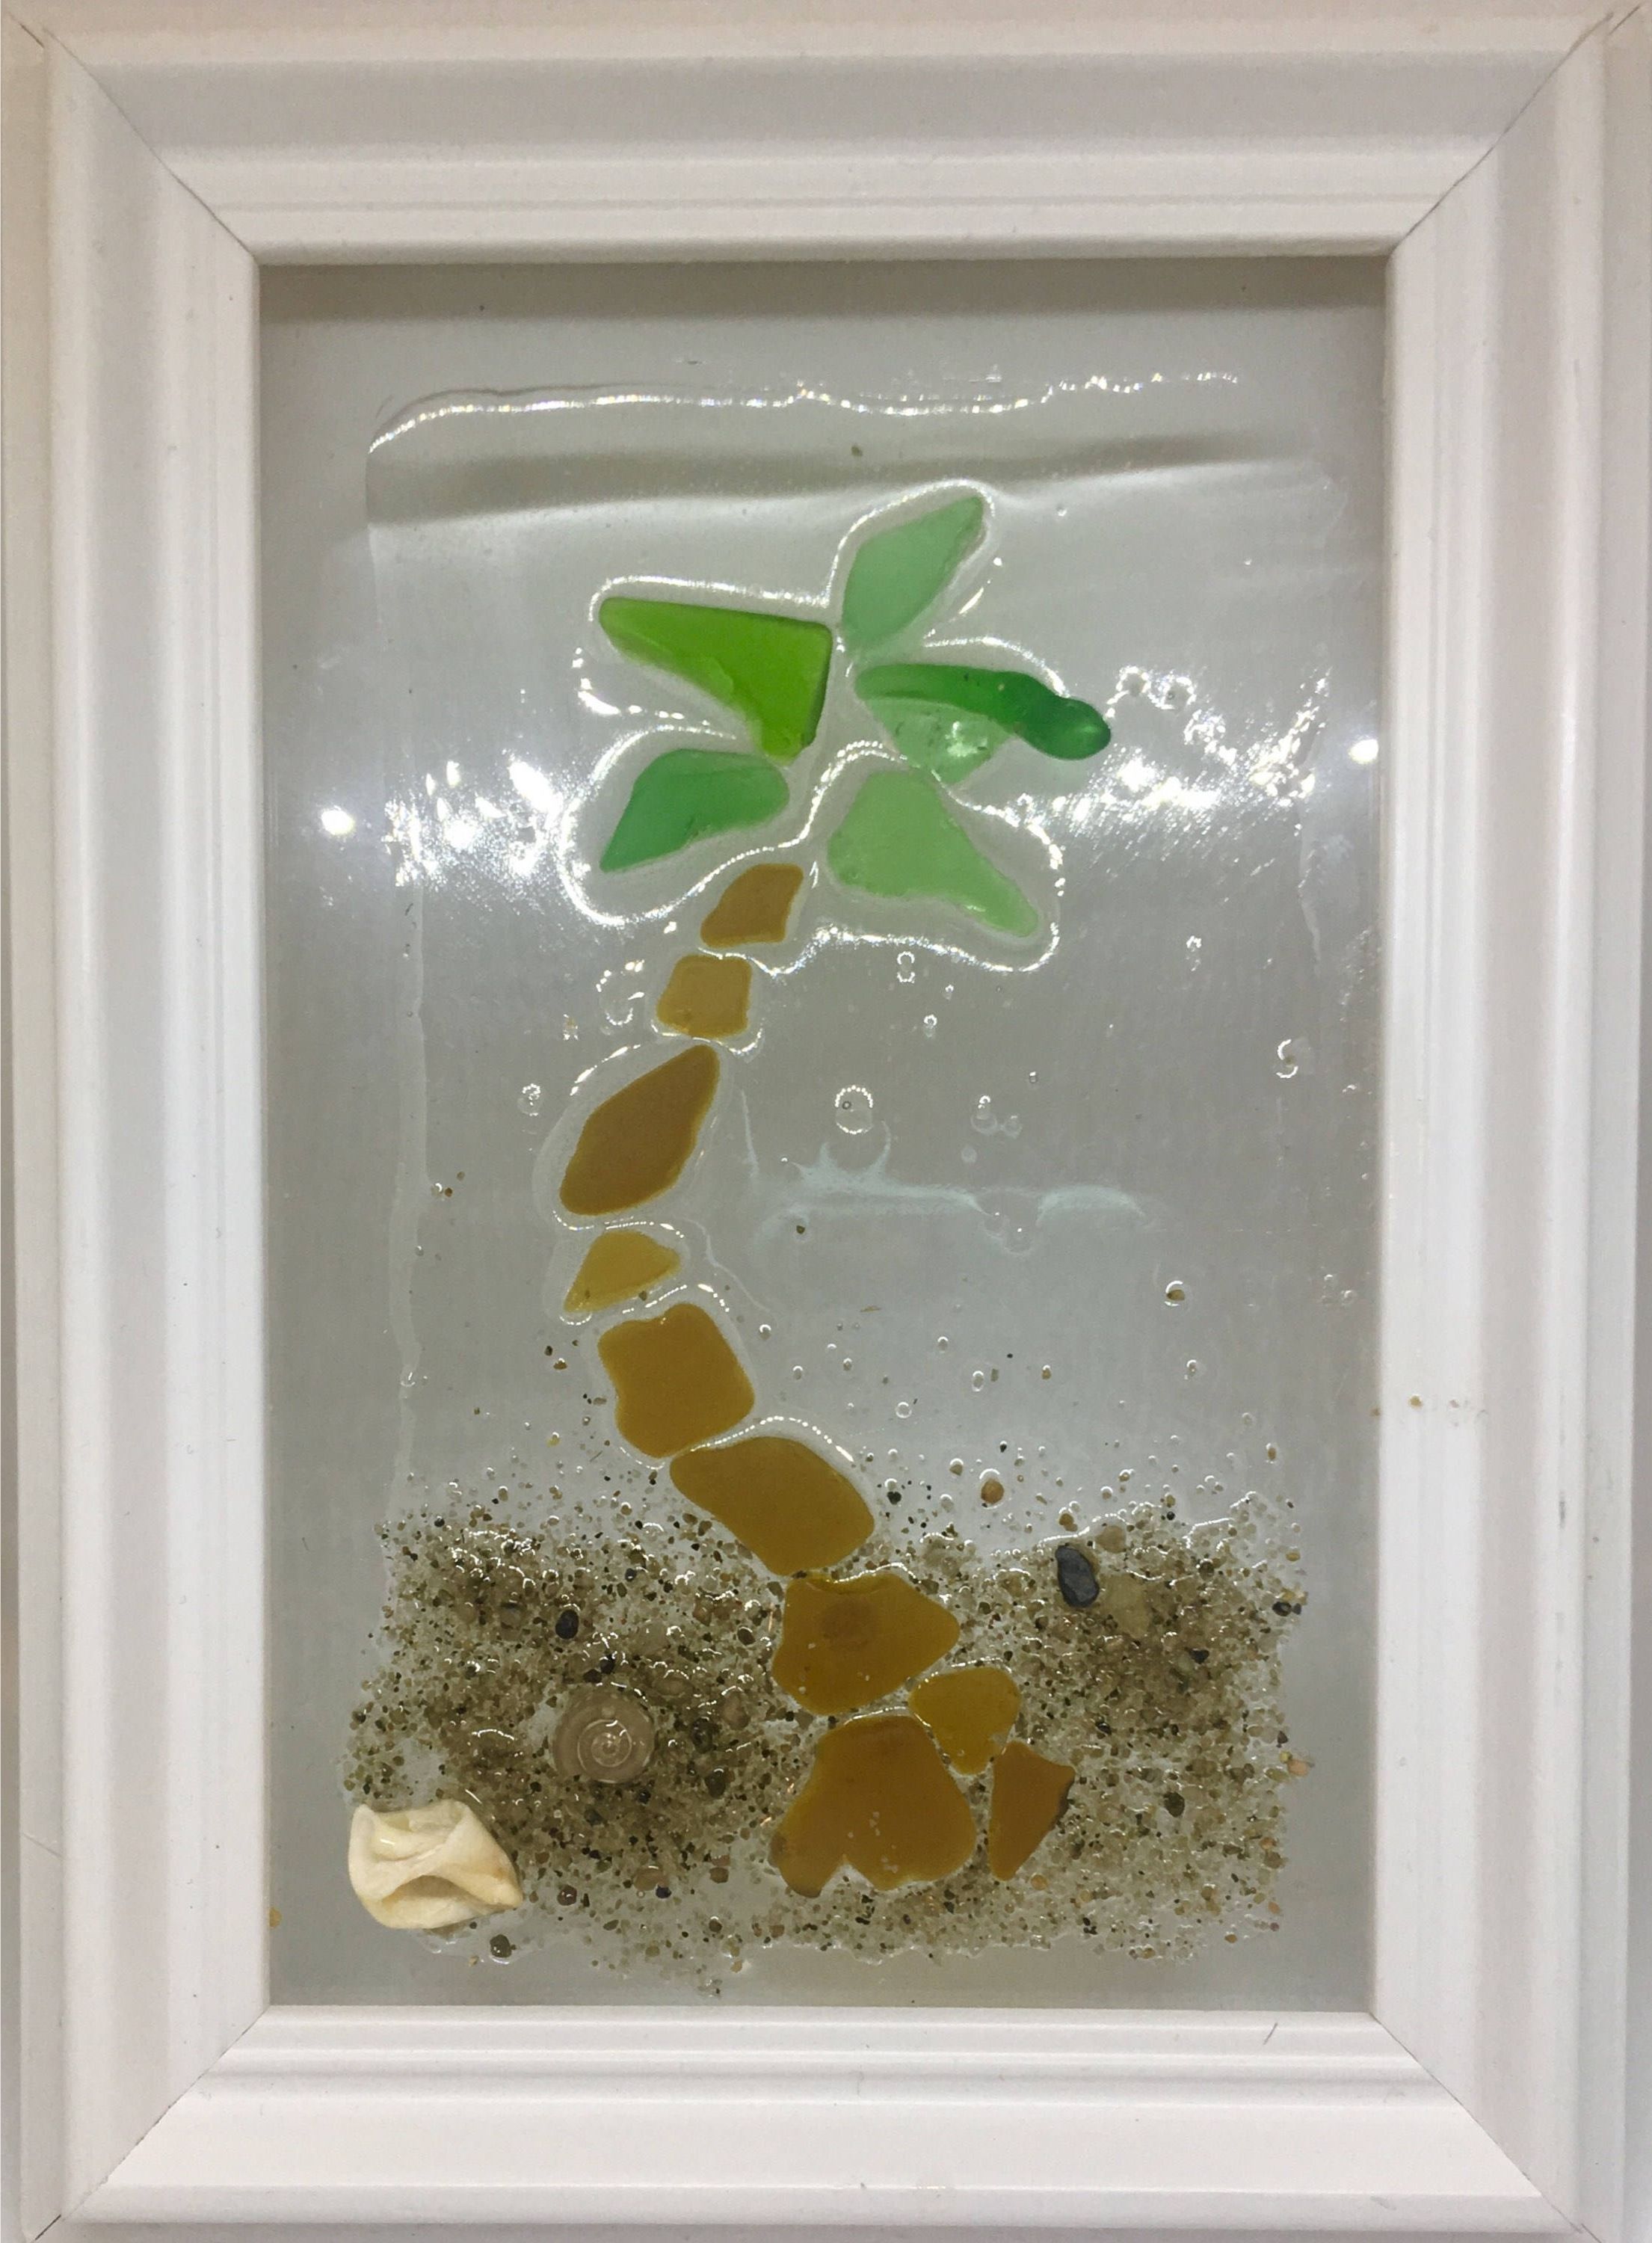 Well Known Sea Glass Wall Art With Regard To Sea Glass Wall Art: Palm Tree Design Made From Genuine Sea Glass 4X (View 2 of 15)